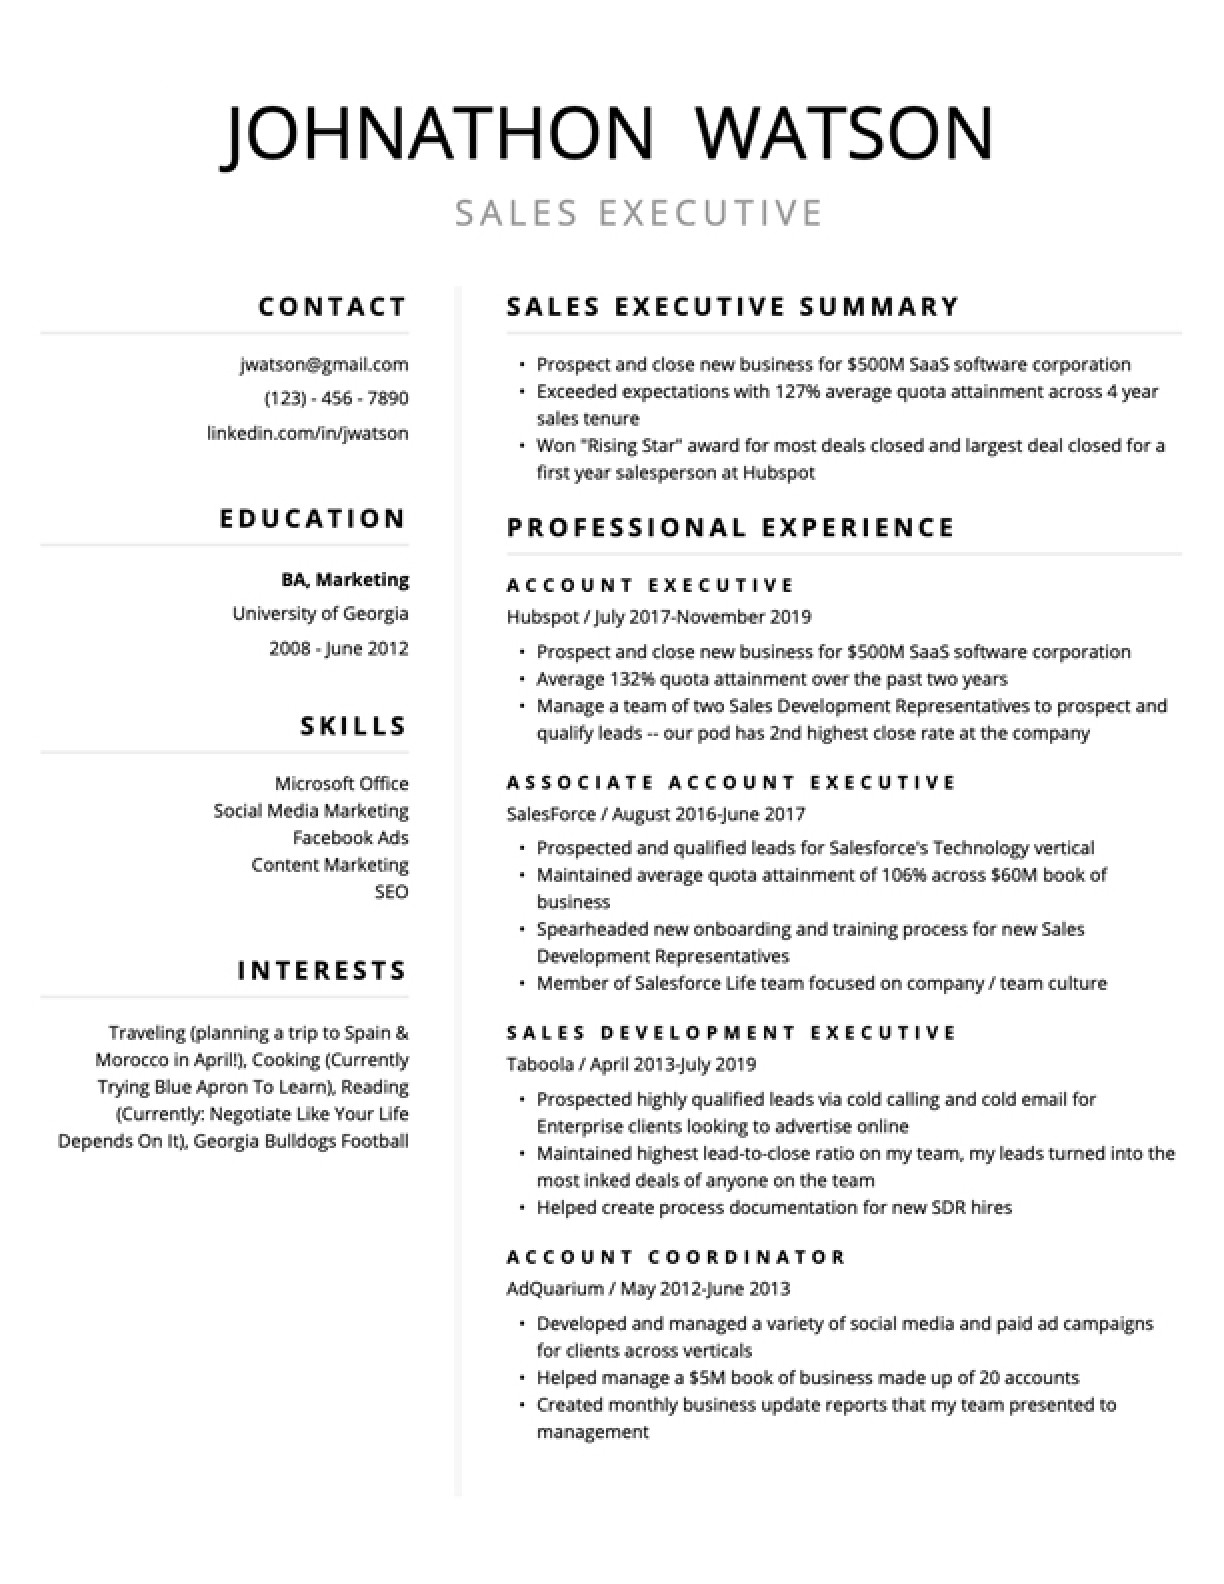 Free Resume Templates No Sign Up Free Resume Templates for 2021 (edit & Download) Resybuild.io